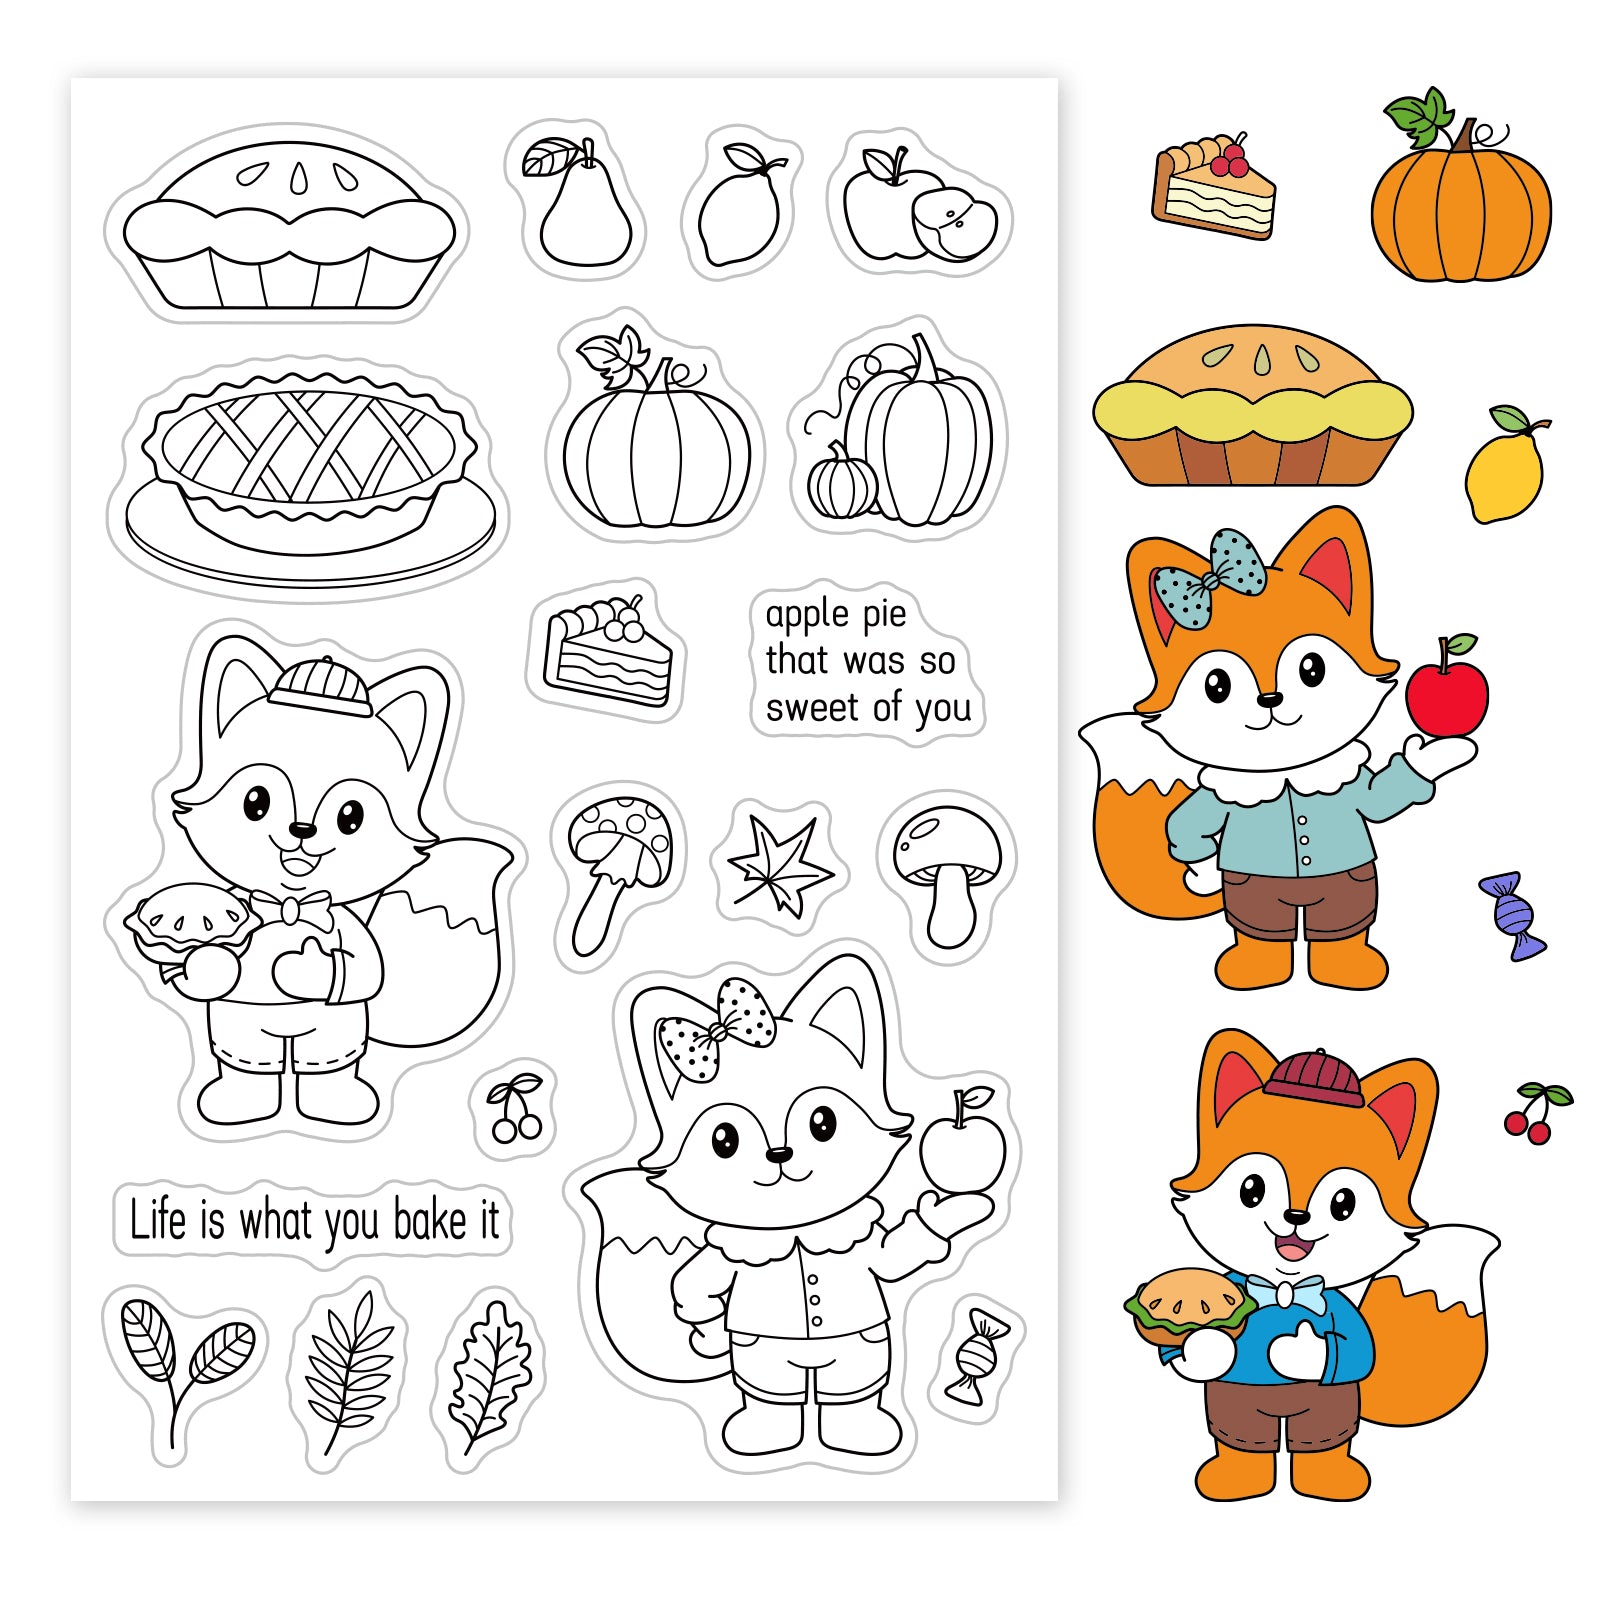 Globleland Fox, Food, Apple Pie, Candy, Pumpkin, Fruit, Pear, Lemon, Cherries, Fallen Leaves Clear Silicone Stamp Seal for Card Making Decoration and DIY Scrapbooking